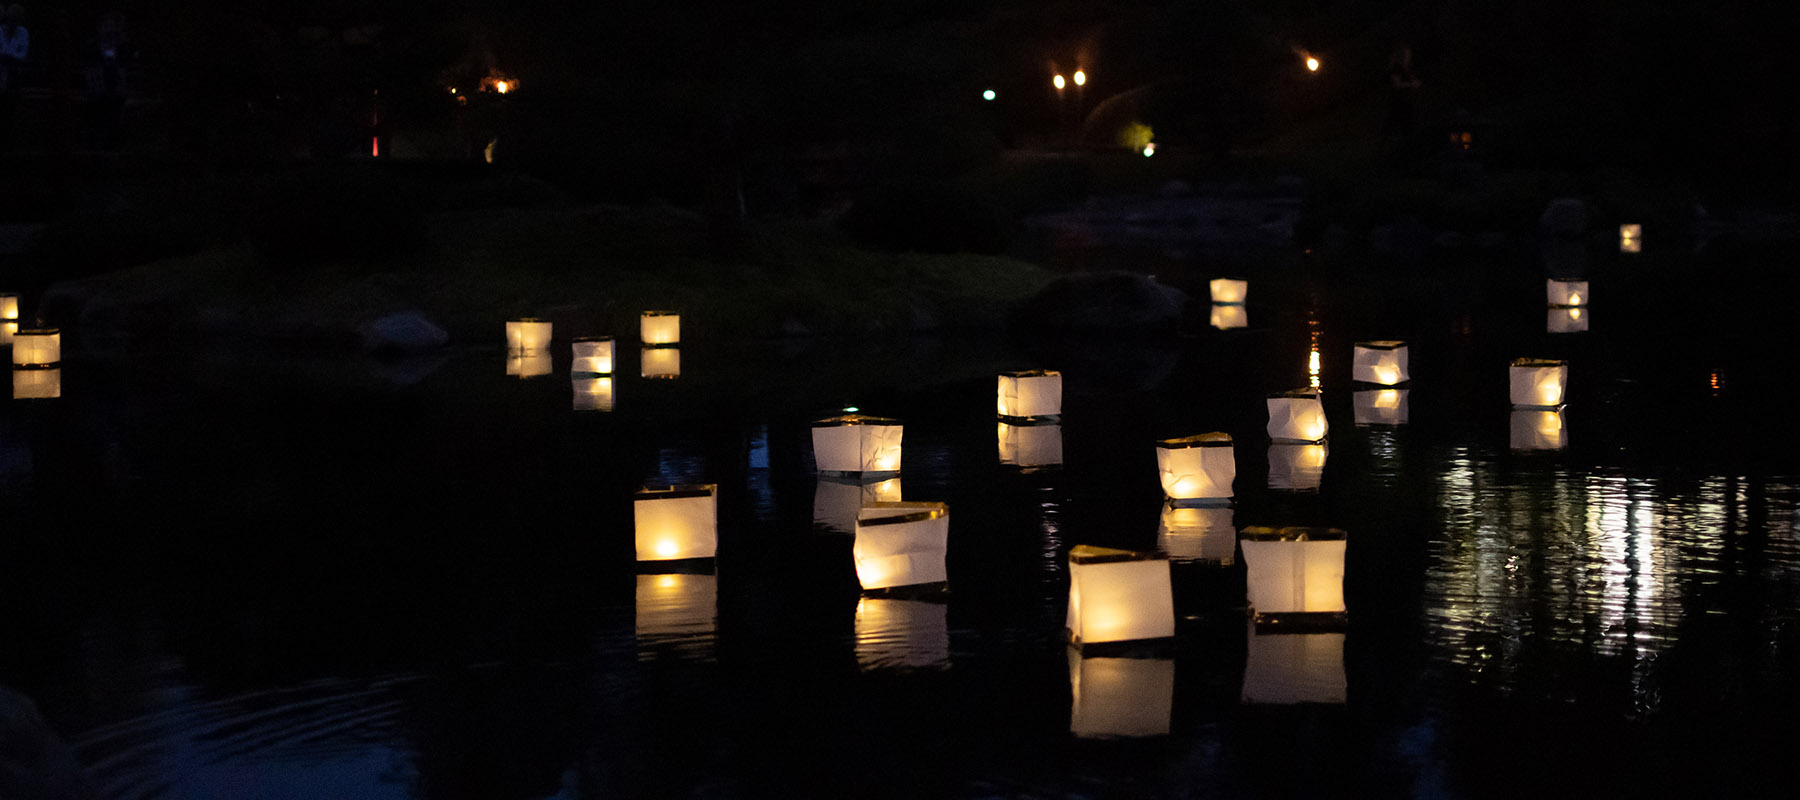 Memorial lanterns lit on the waters of the Japanese Garden.